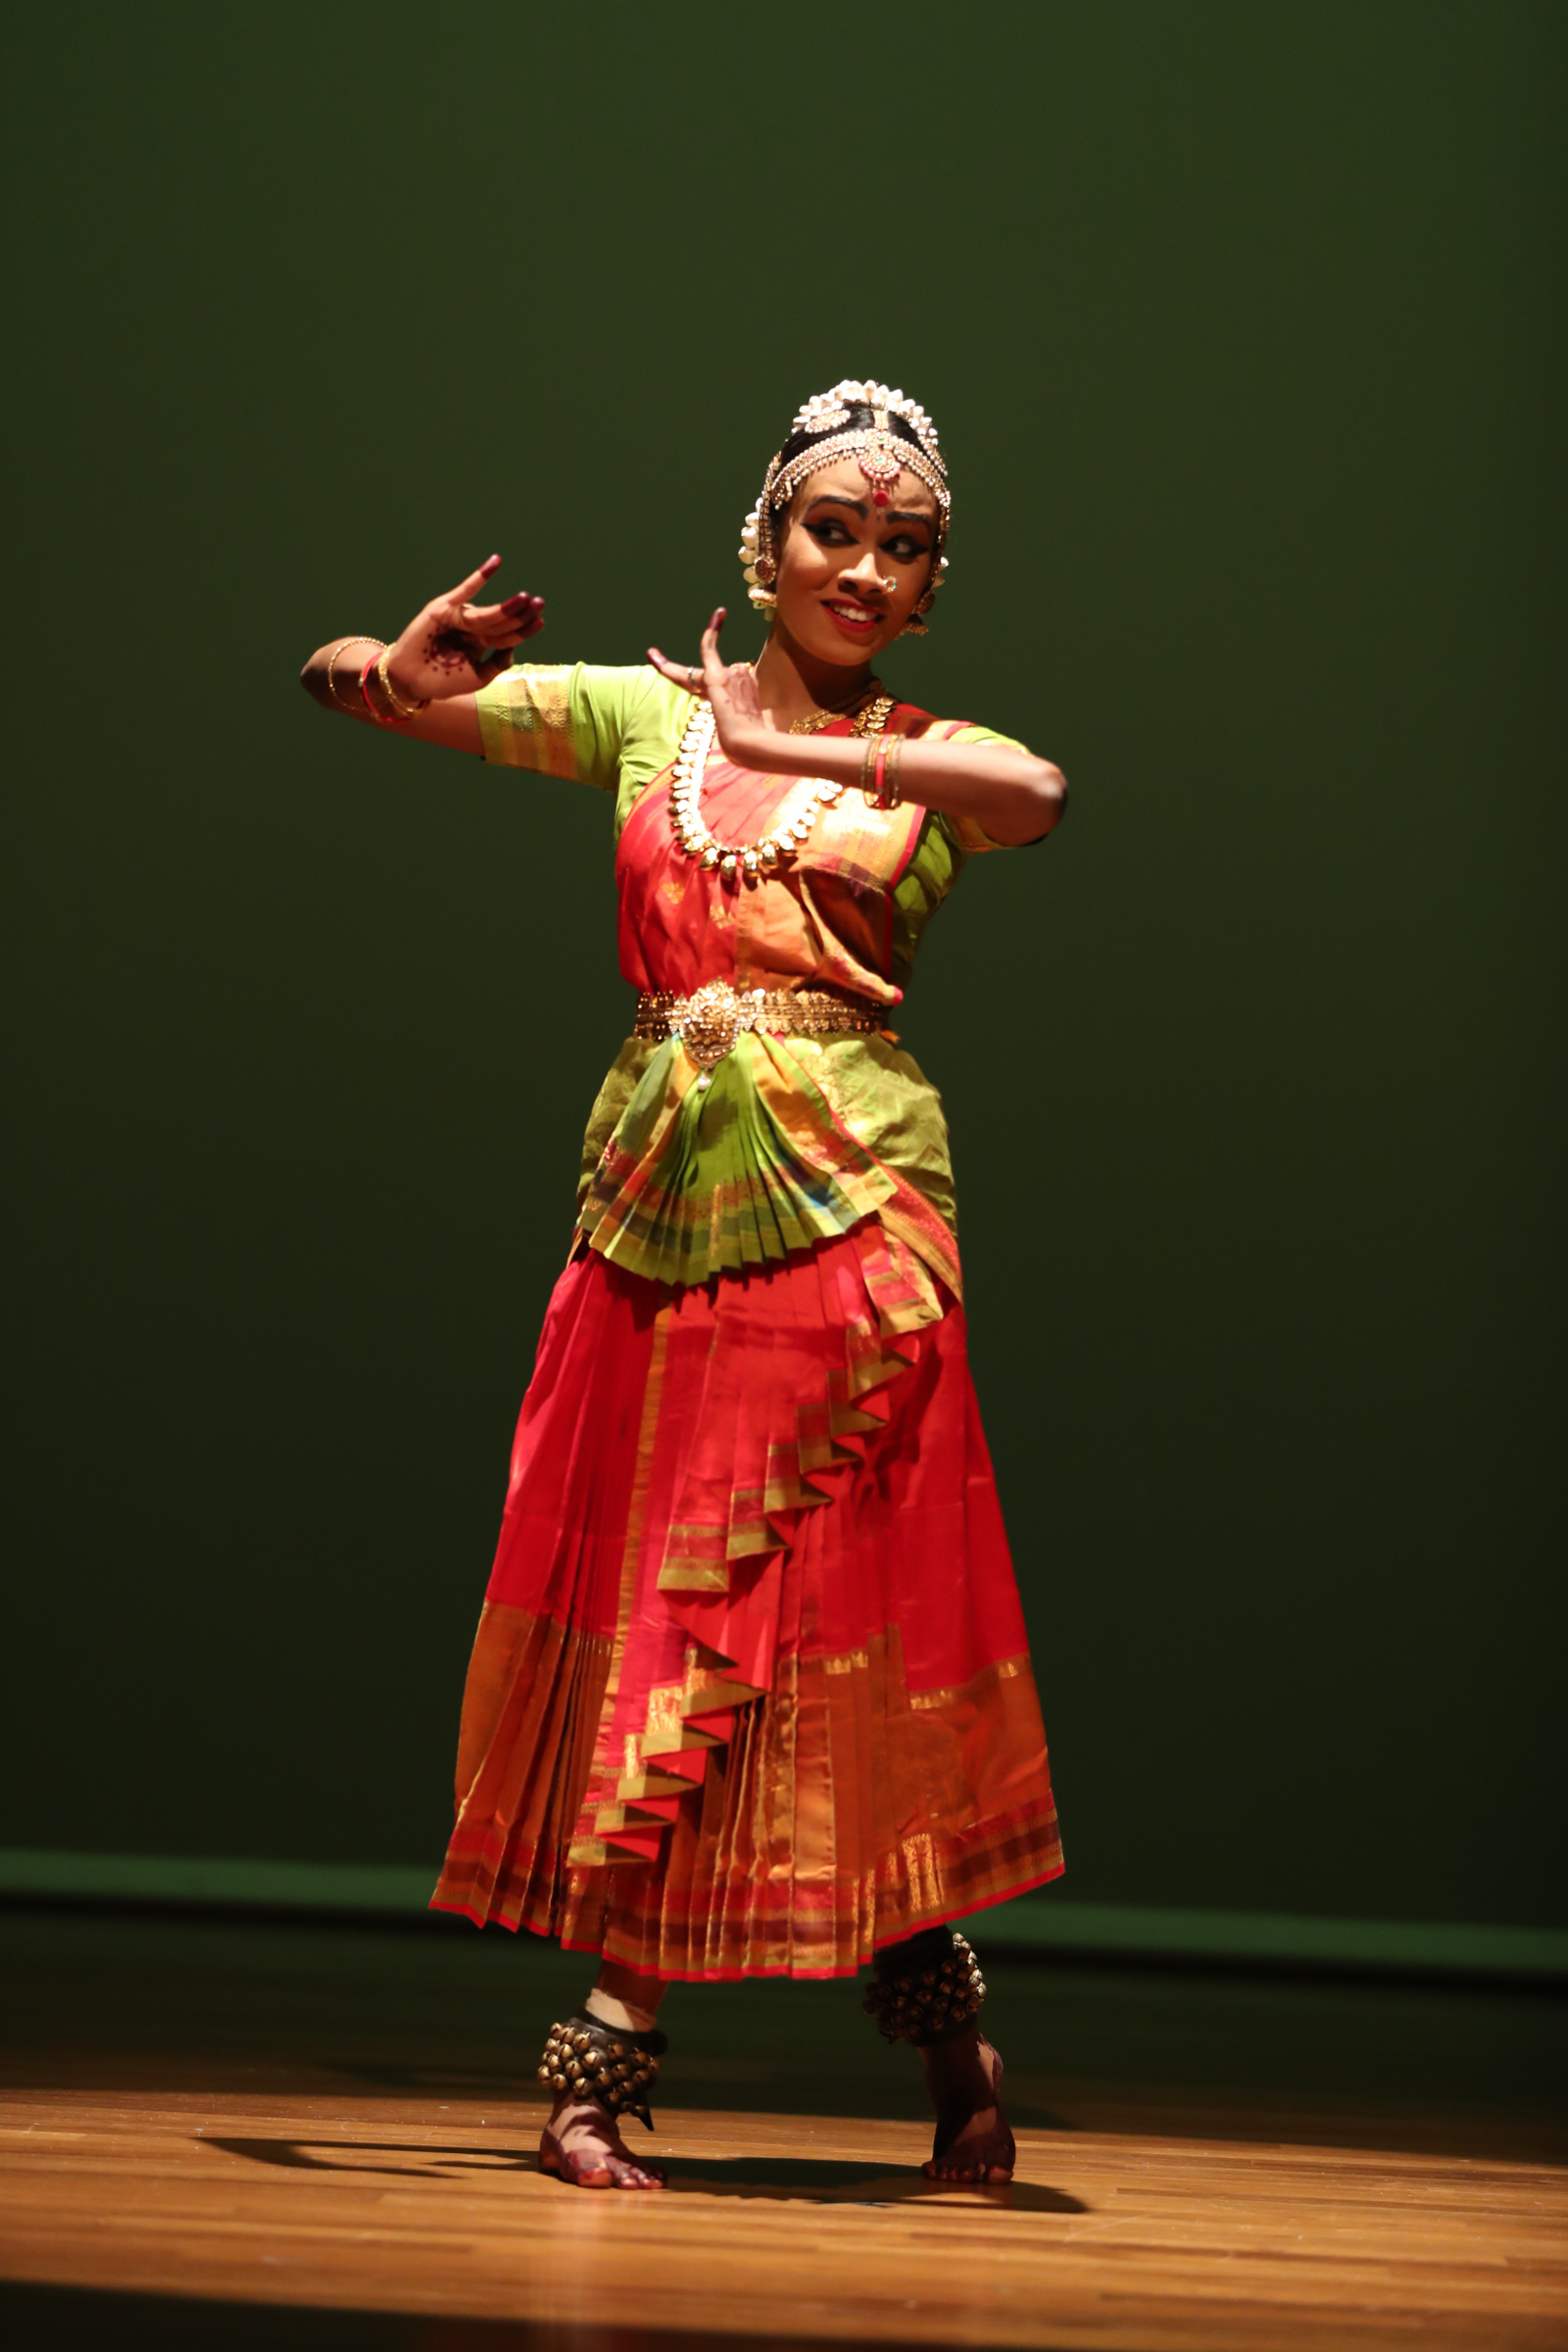 Confluence Of Four Dance Forms In Krishna's Praise - Natyahasini